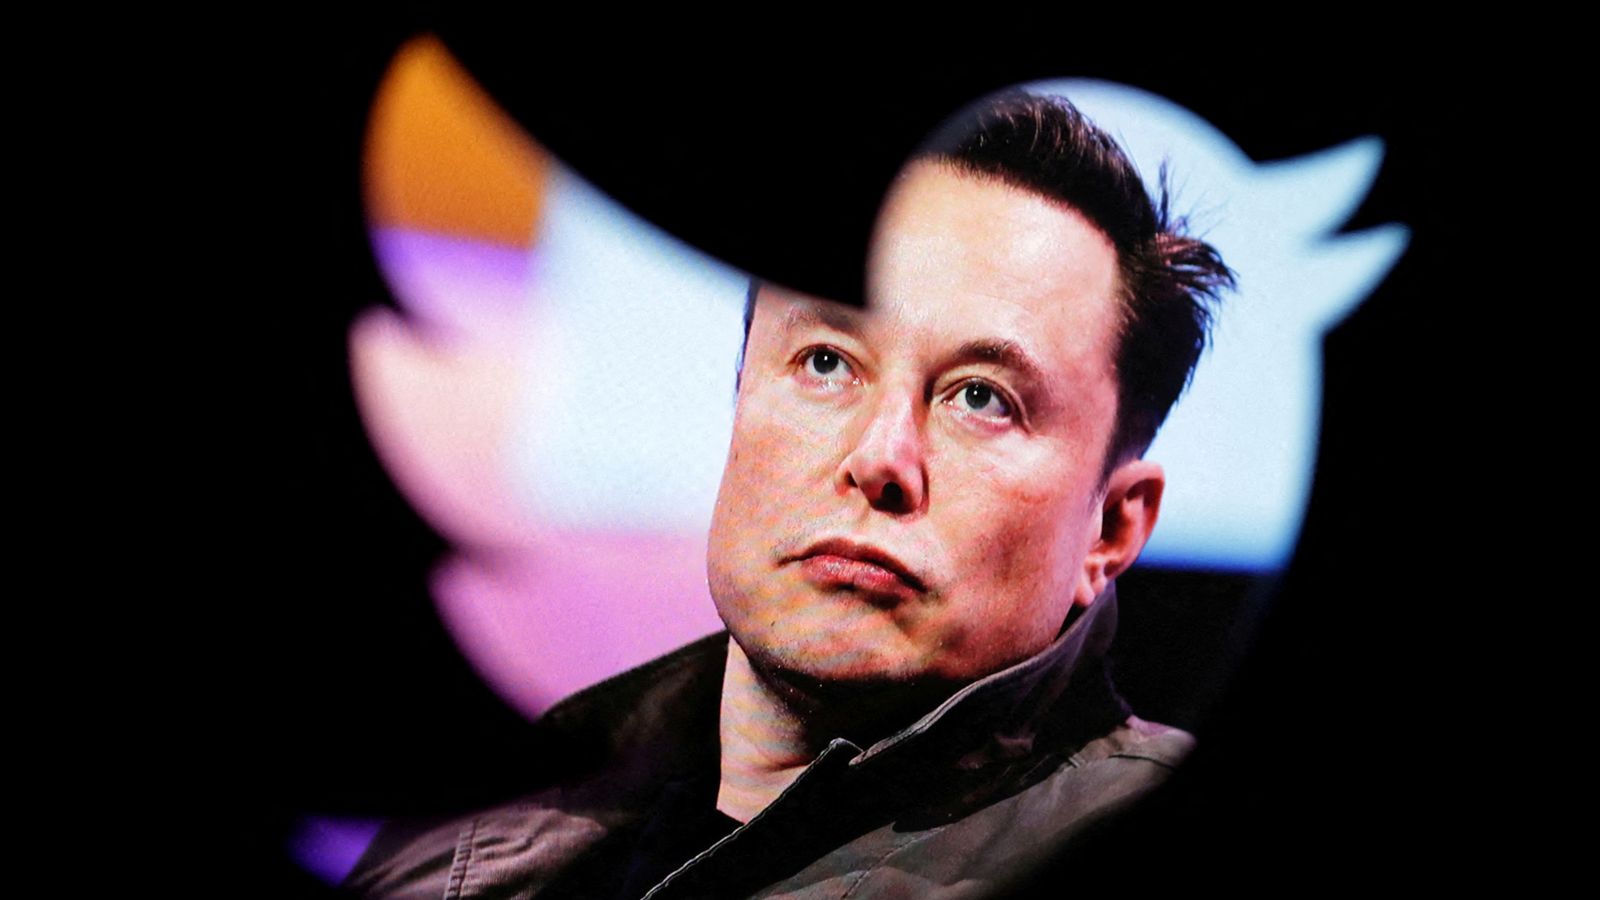 Elon Musk to start Twitter layoffs within hours - and offices are closed